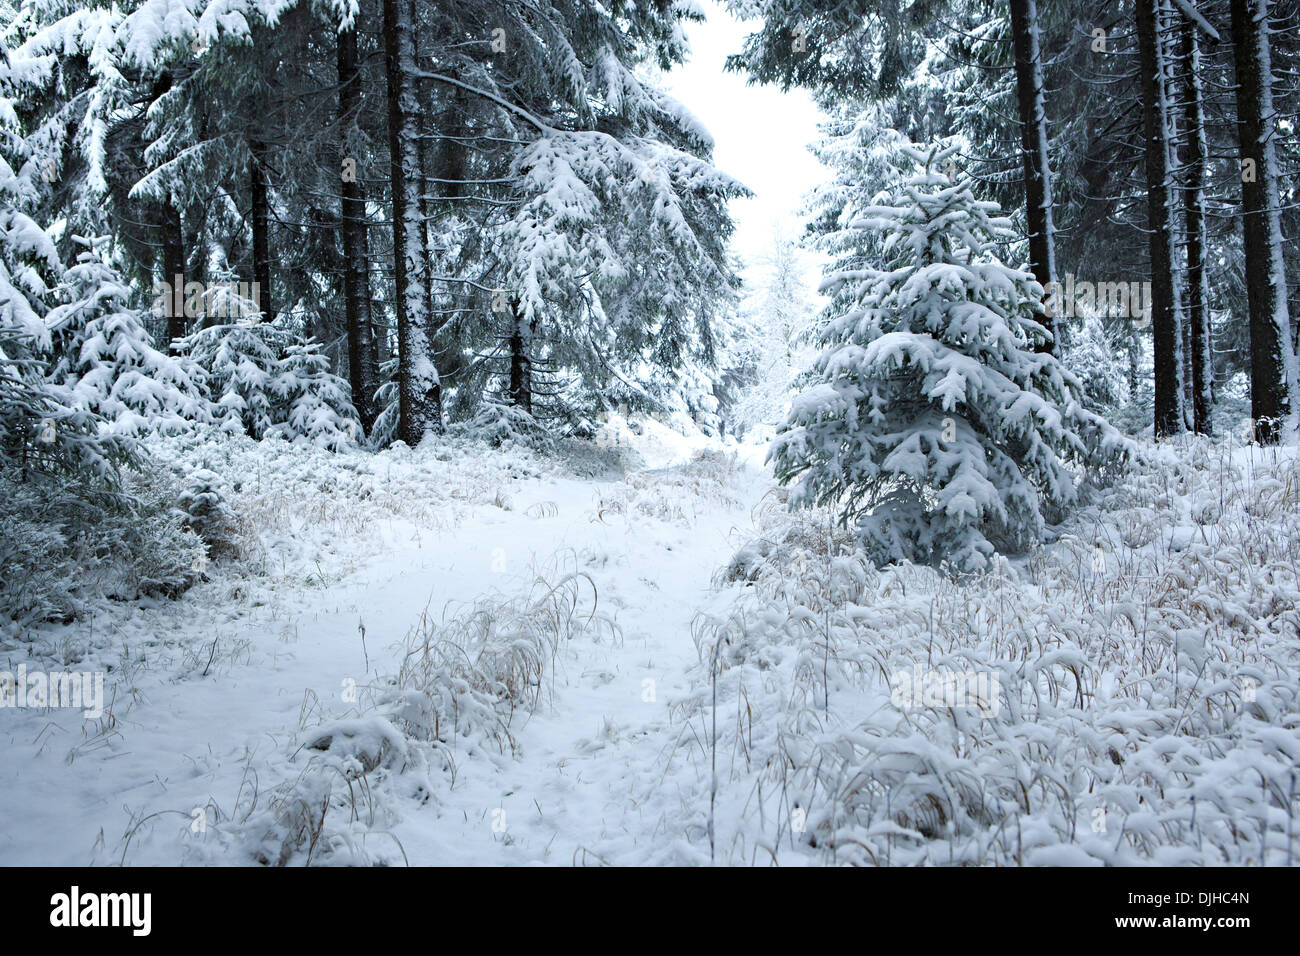 Winter forest under new snow in Masserberg, Thuringia, Germany. Stock Photo